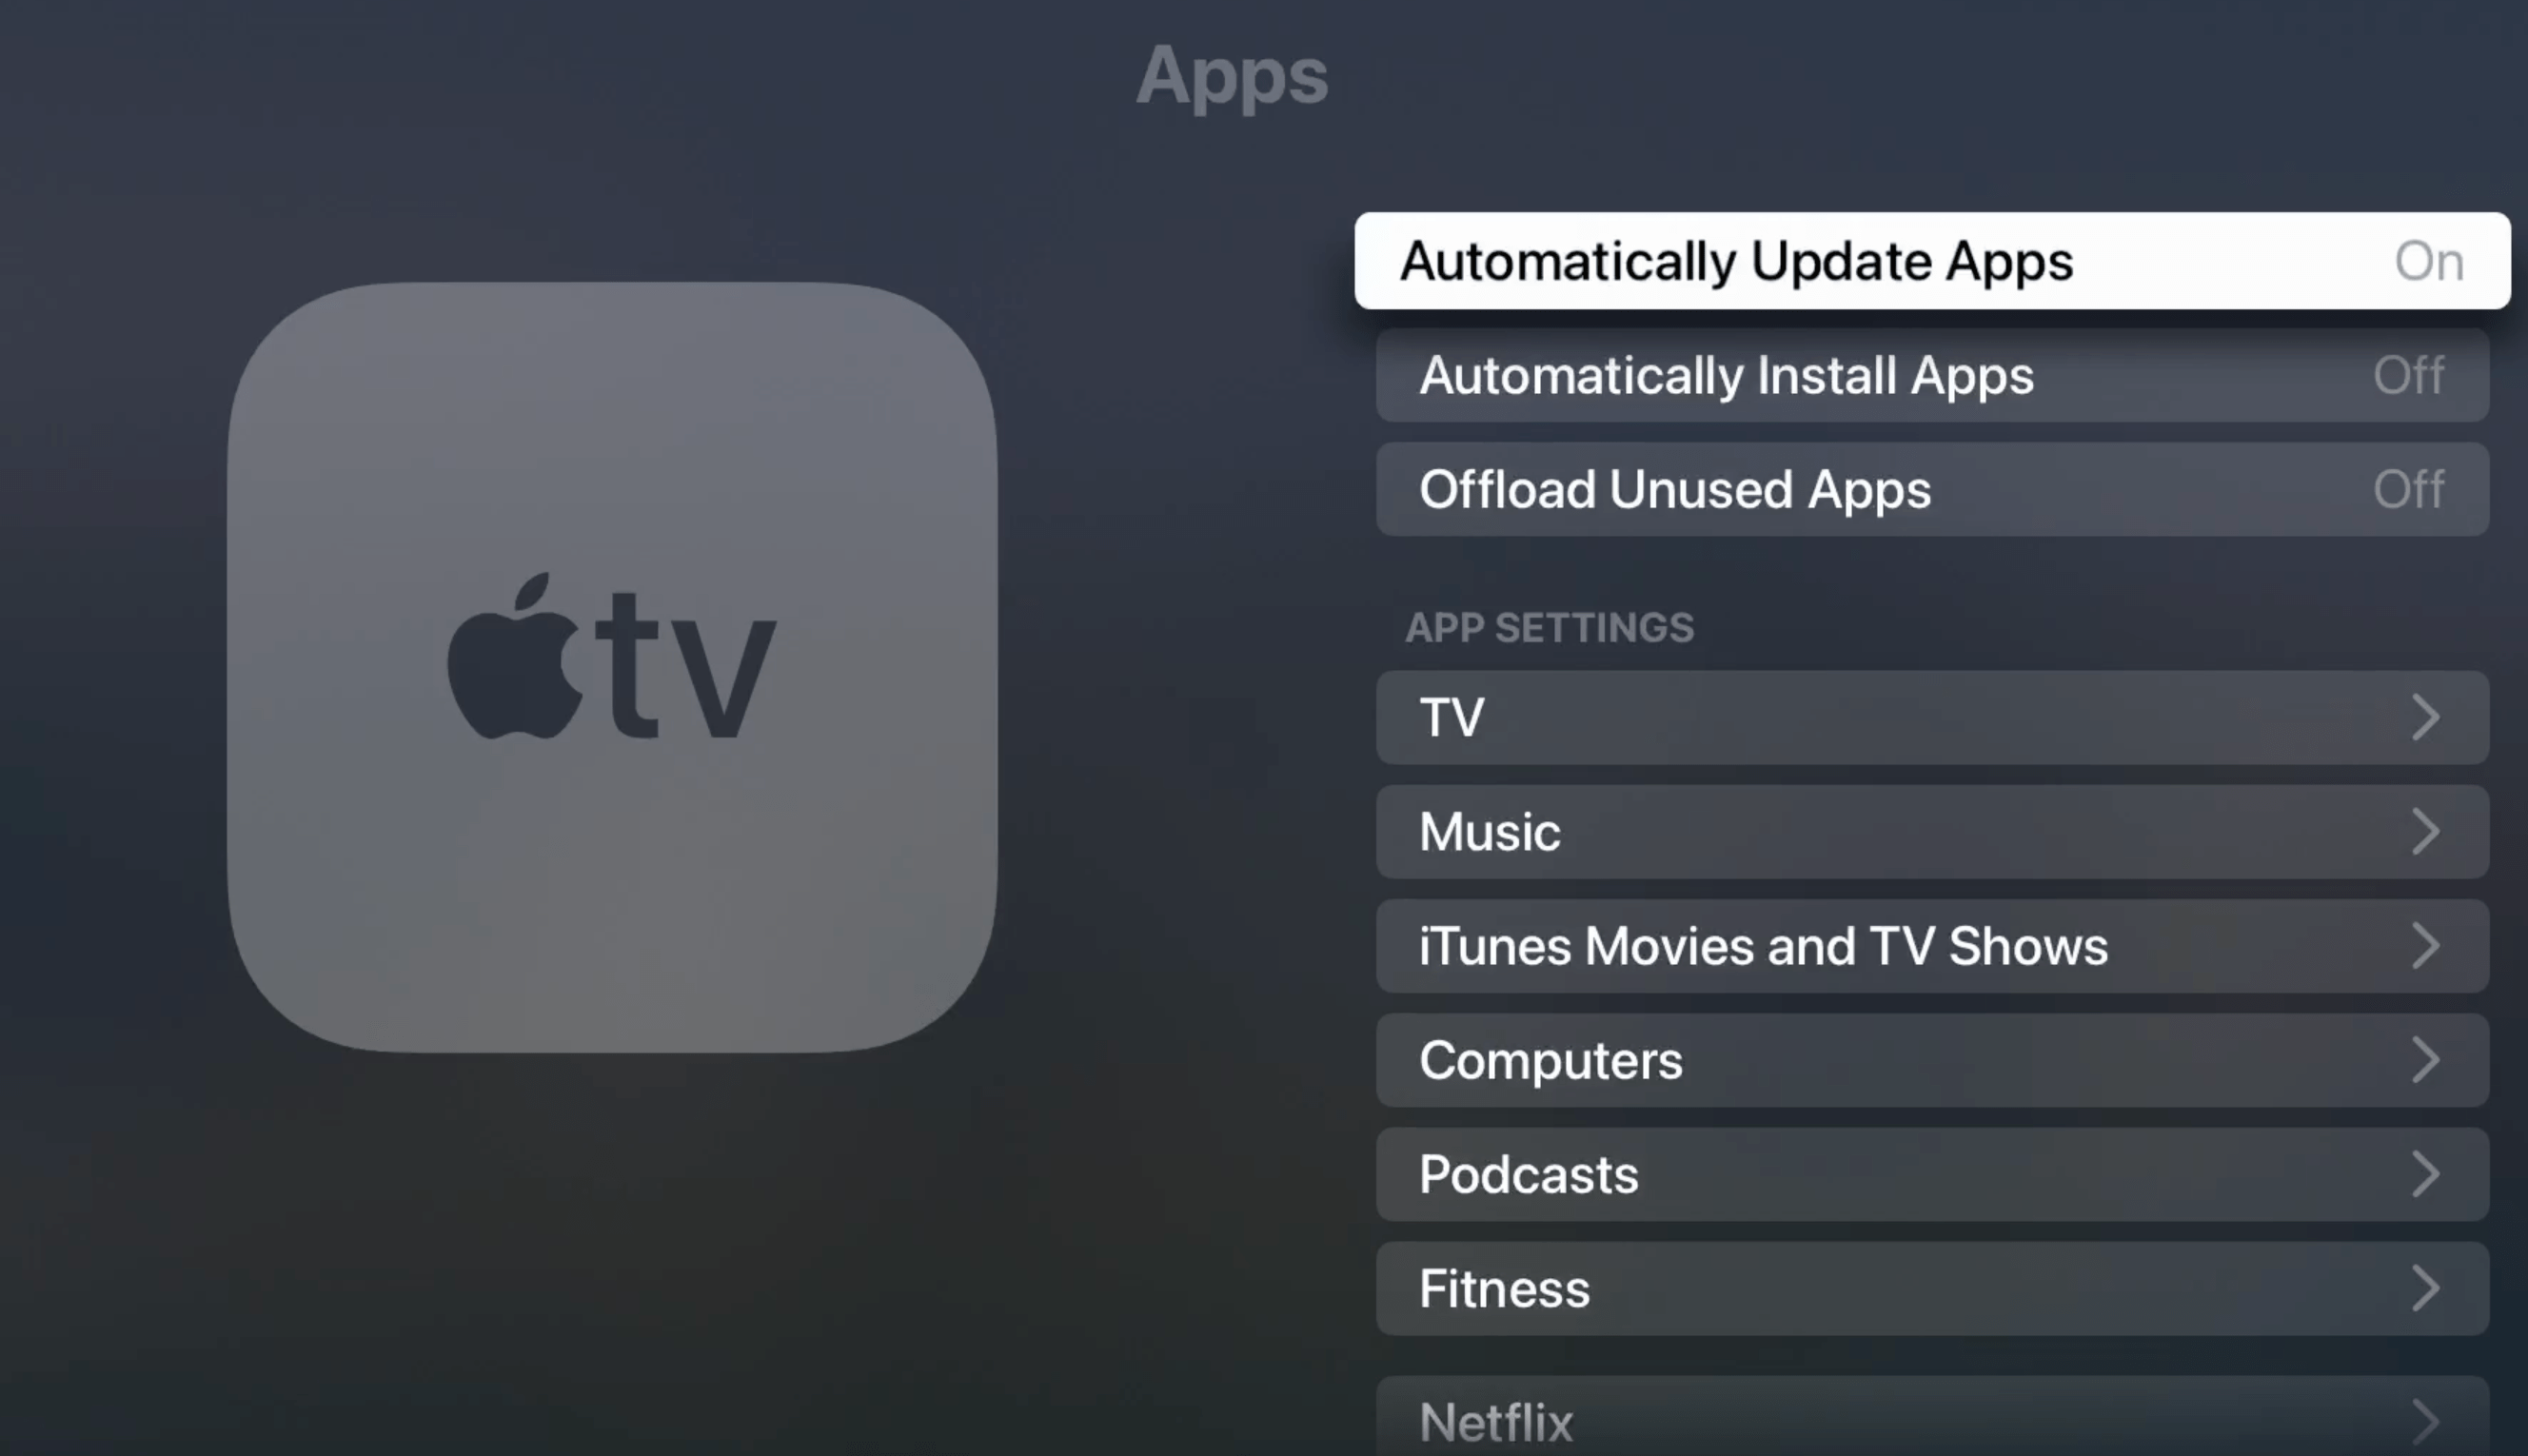 Automatically Update Apps